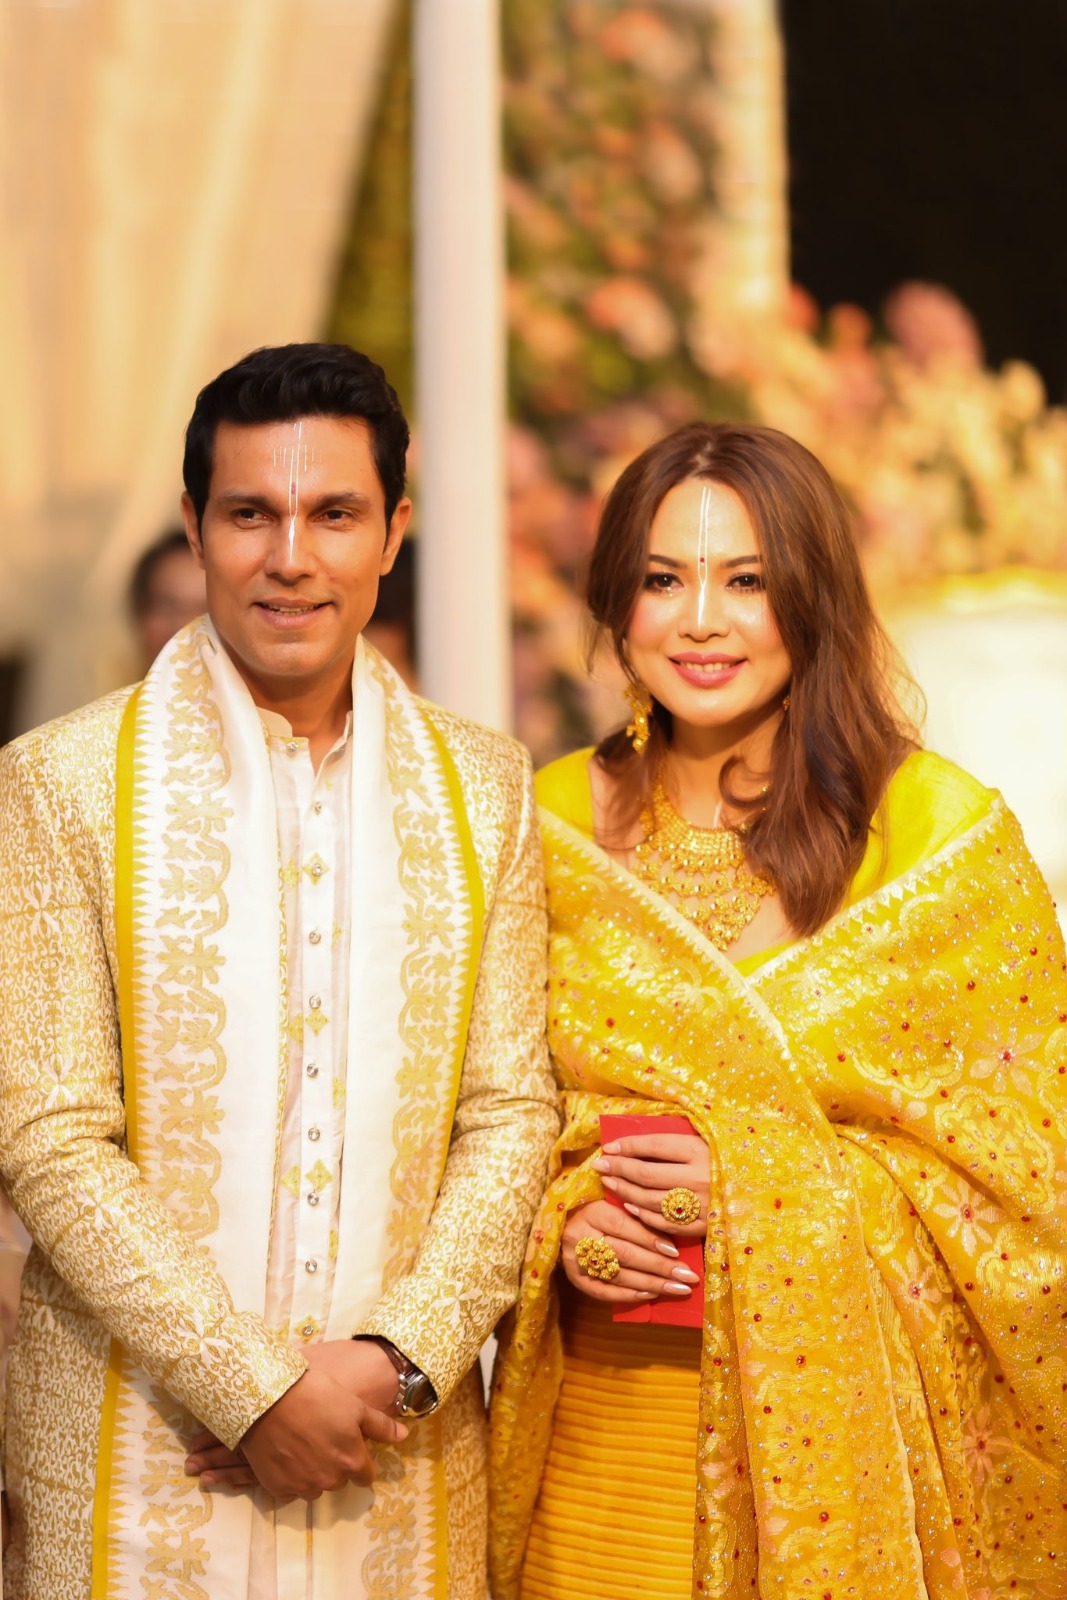 'From 'I' to 'We' in a happily ever after': Randeep Hooda, Lin Laishram glow in ethnic golden outfits